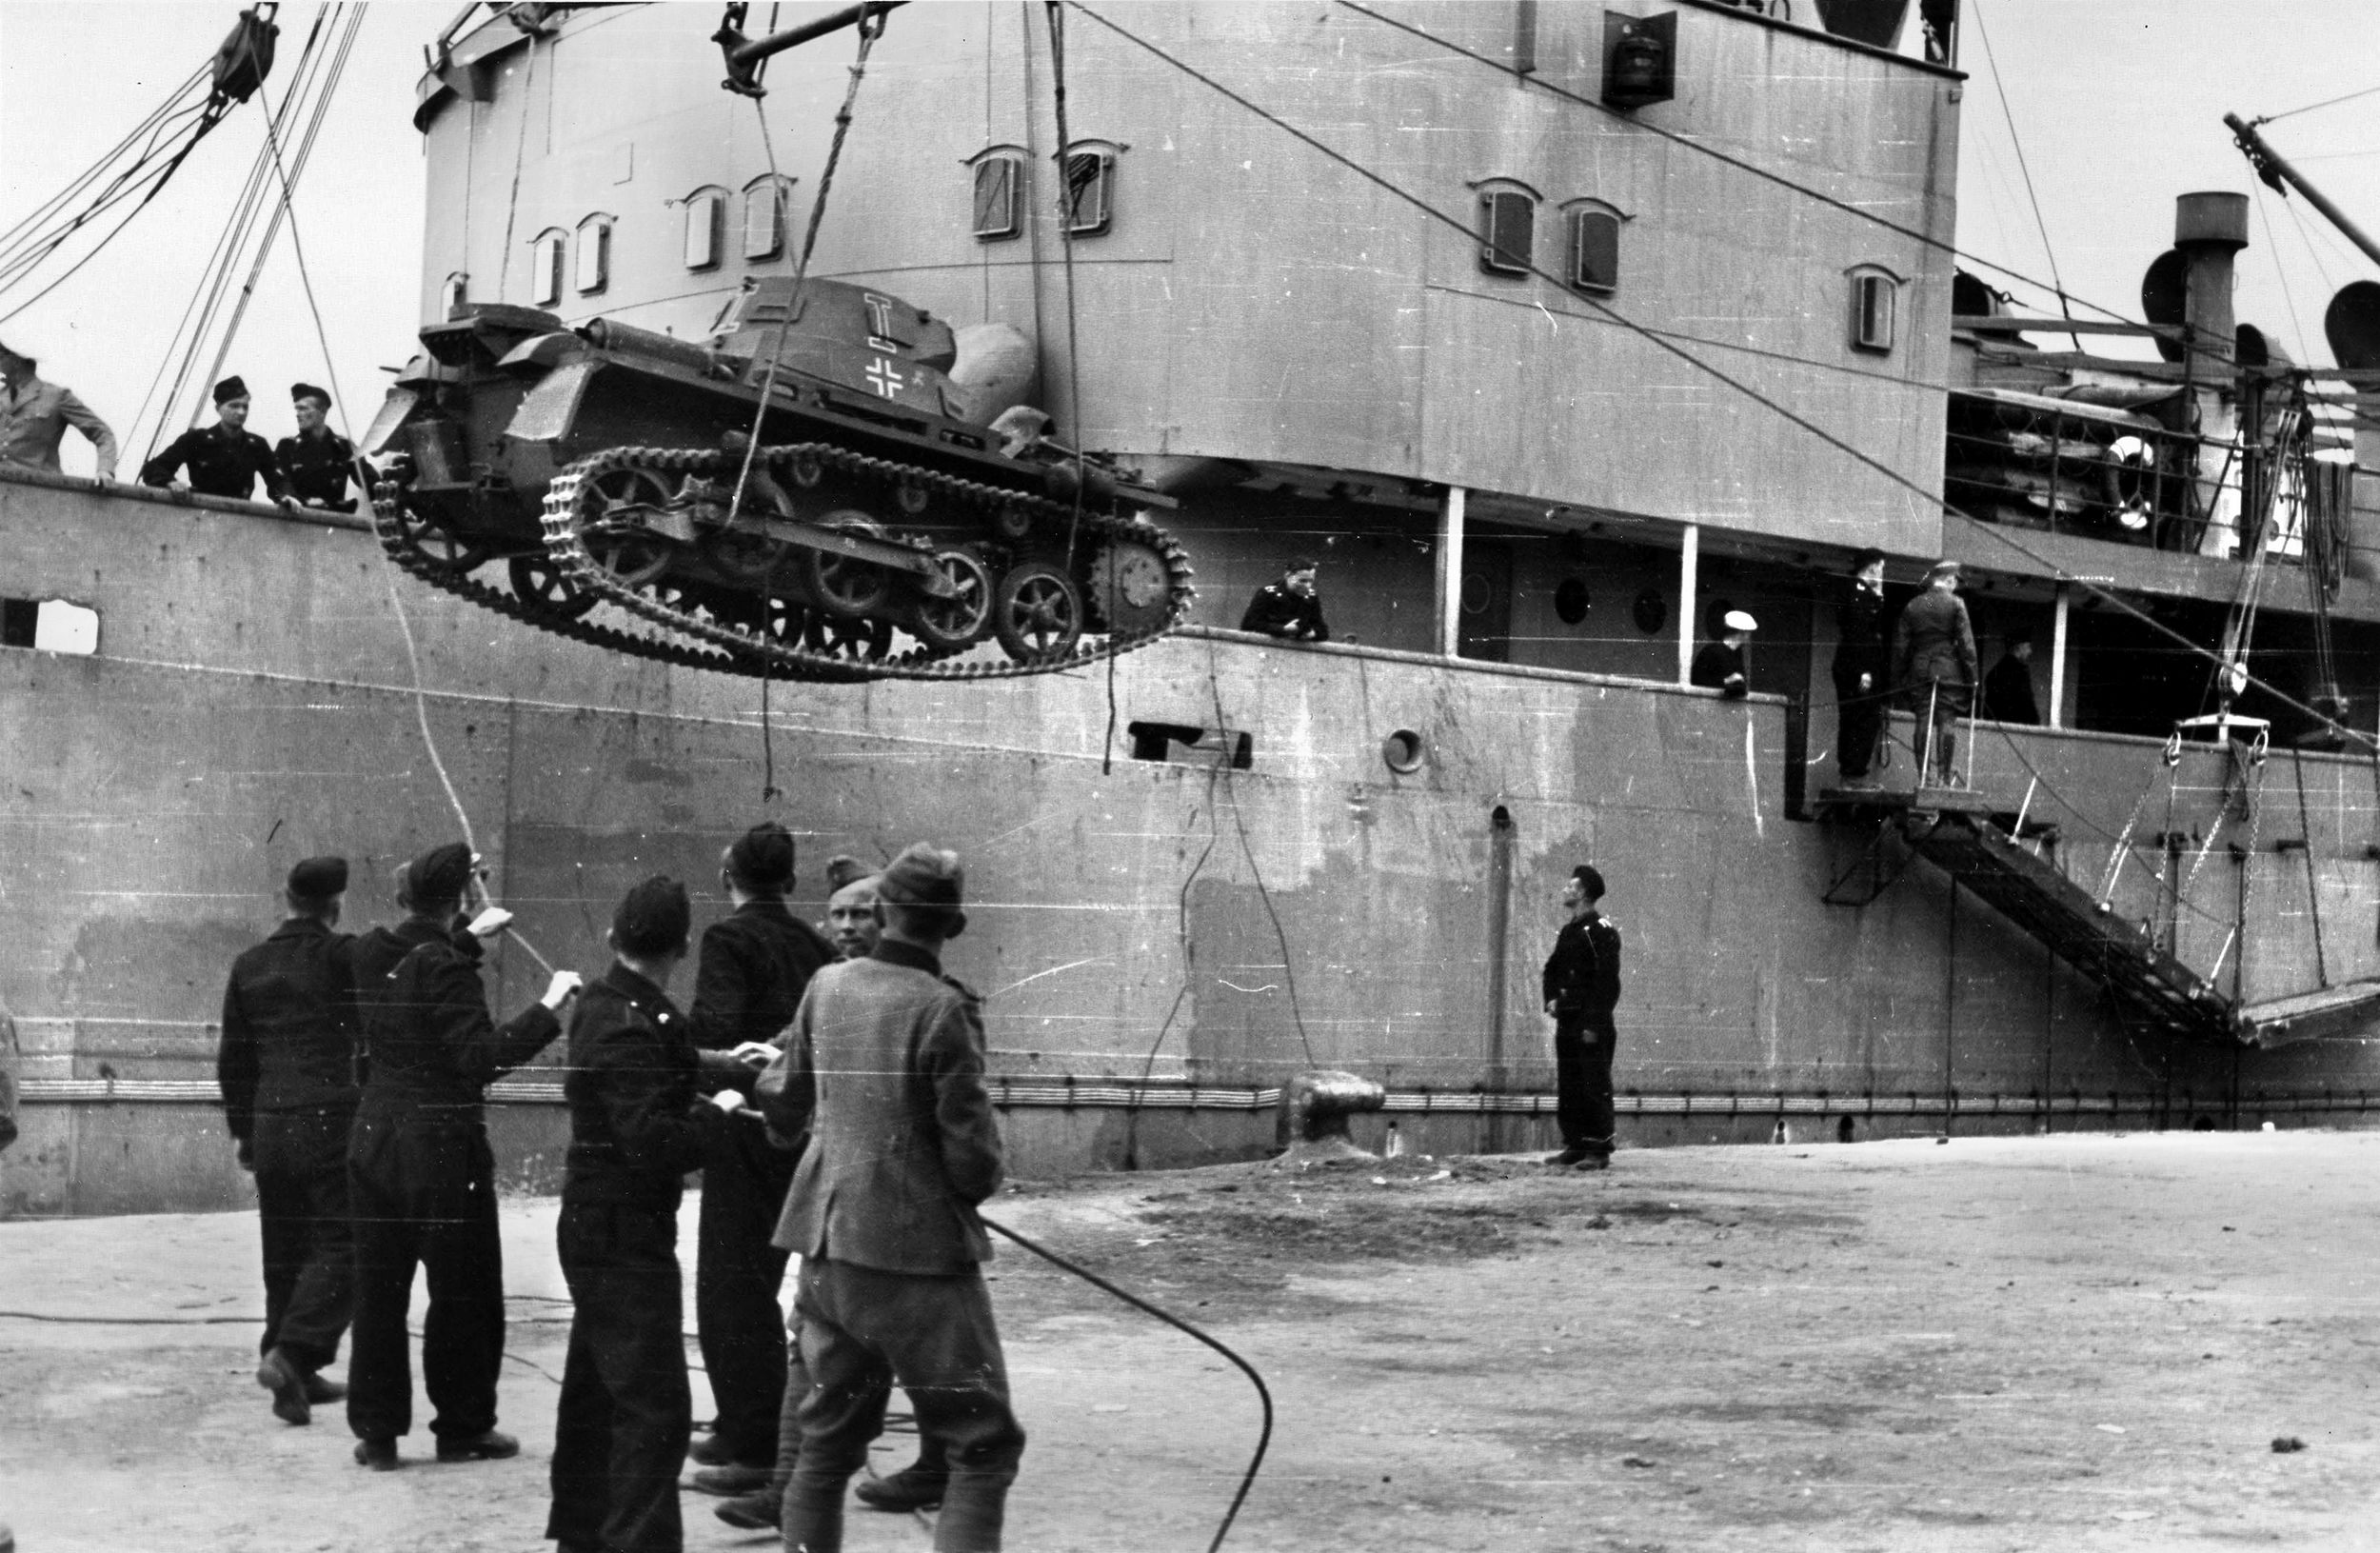 A German Pz.Kpfw I belonging to the 5th Light Division is unloaded in Tripoli Harbor in March 1941. By this time, Rommel’s Deutsche Afrika Corps (DAK) consisted of 37,000 Italian and 9,300 German troops and  he now had the support of Ju-87 Stuka dive bombers and Messerschmitt Me-110 fighters from the Luftwaffe’s X. Fliegerkorps (10th Air Corps) which had arrived from Europe.